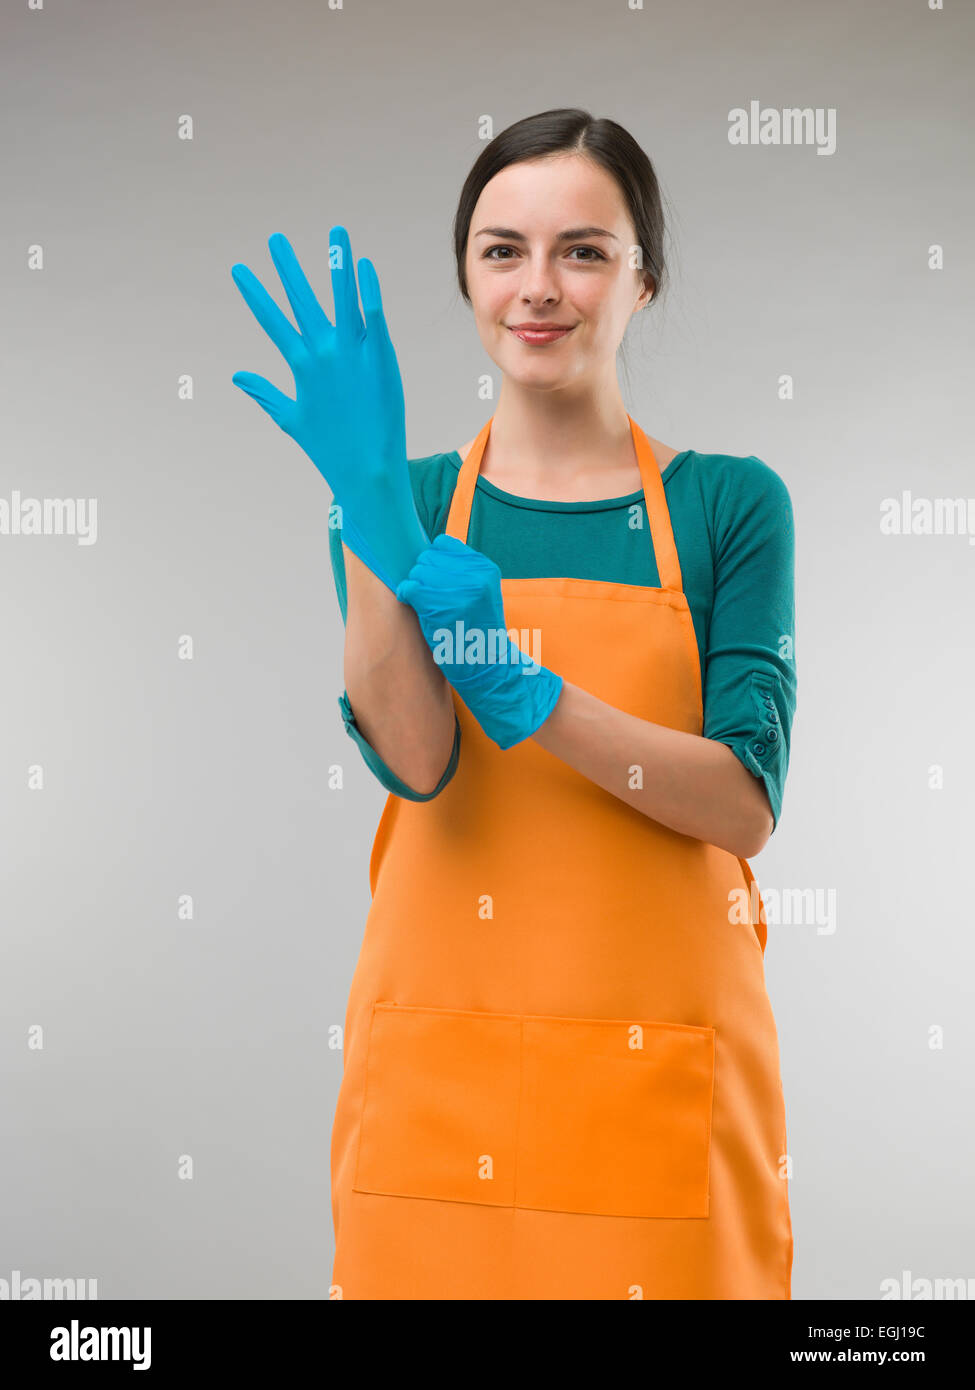 young happy cleaning woman putting on rubber gloves Stock Photo